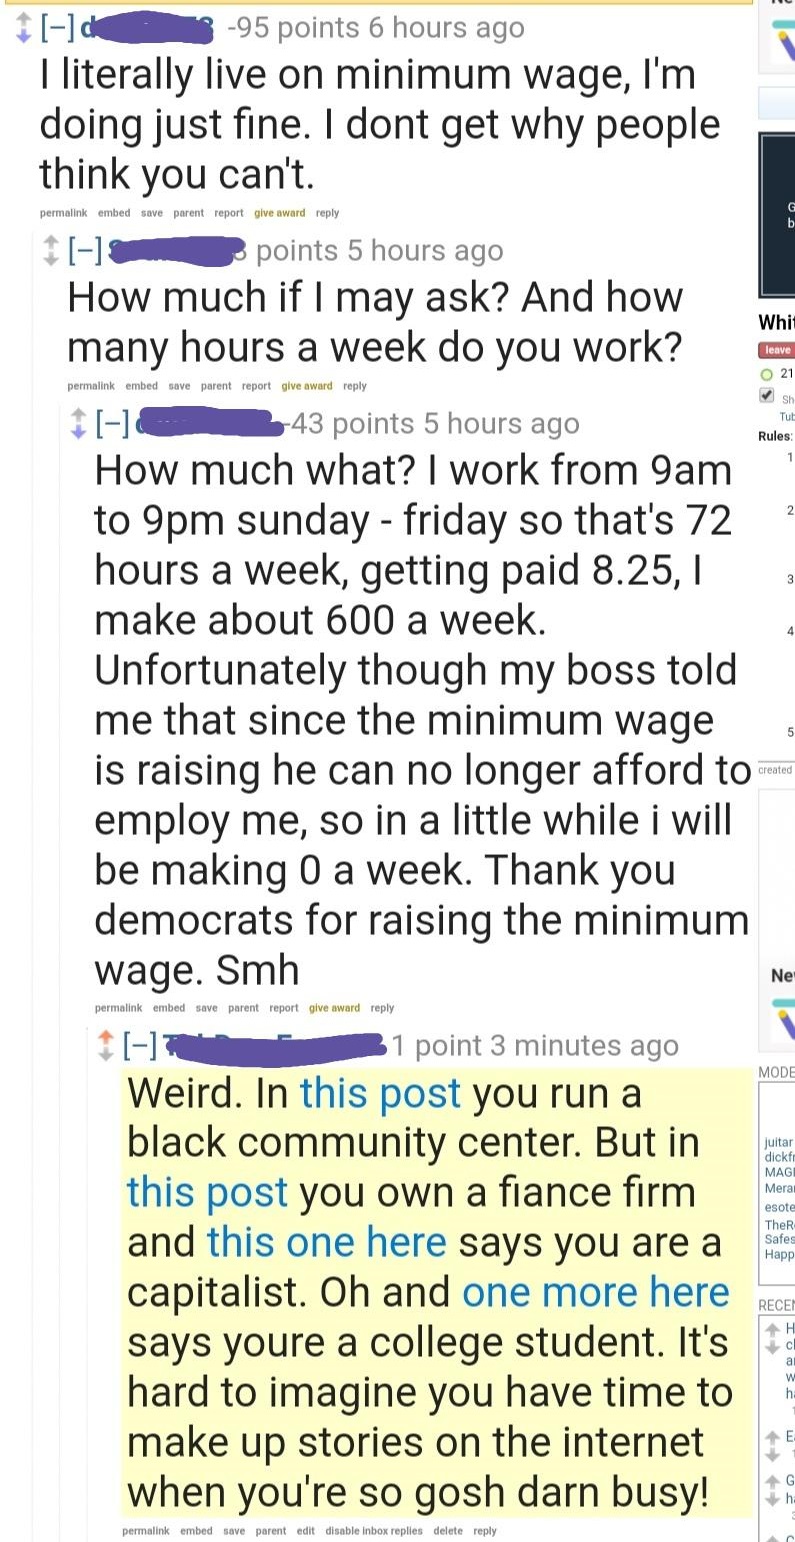 internet liars called out - paper - de 95 points 6 hours ago I literally live on minimum wage, I'm doing just fine. I dont get why people think you can't. permalink embed save parent report give award 1 points 5 hours ago How much if I may ask? And how ma